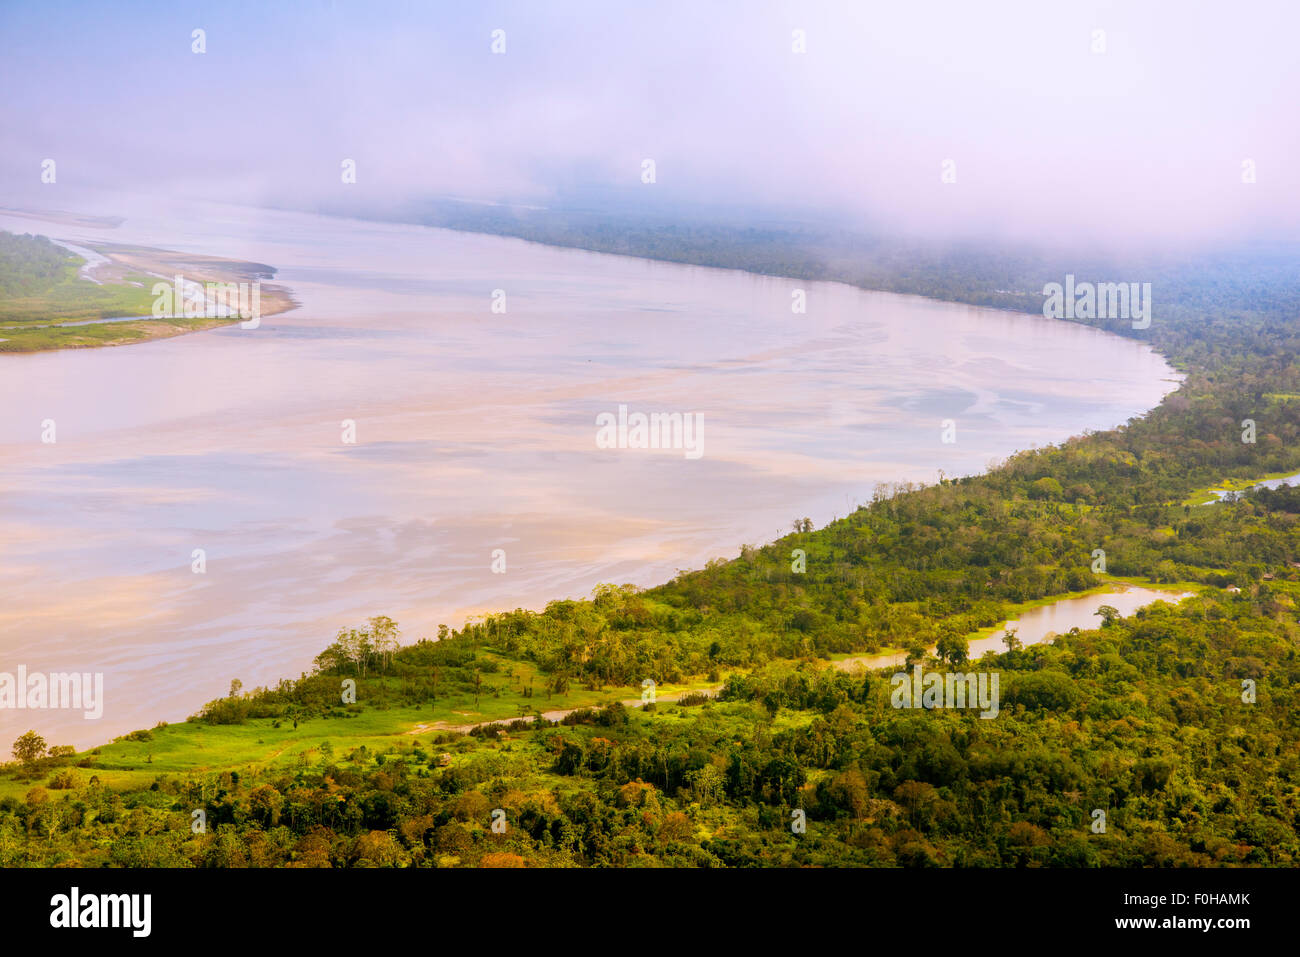 Amazon River aerial, with settlements and secondary rainforest, near Iquitos, Peru Stock Photo